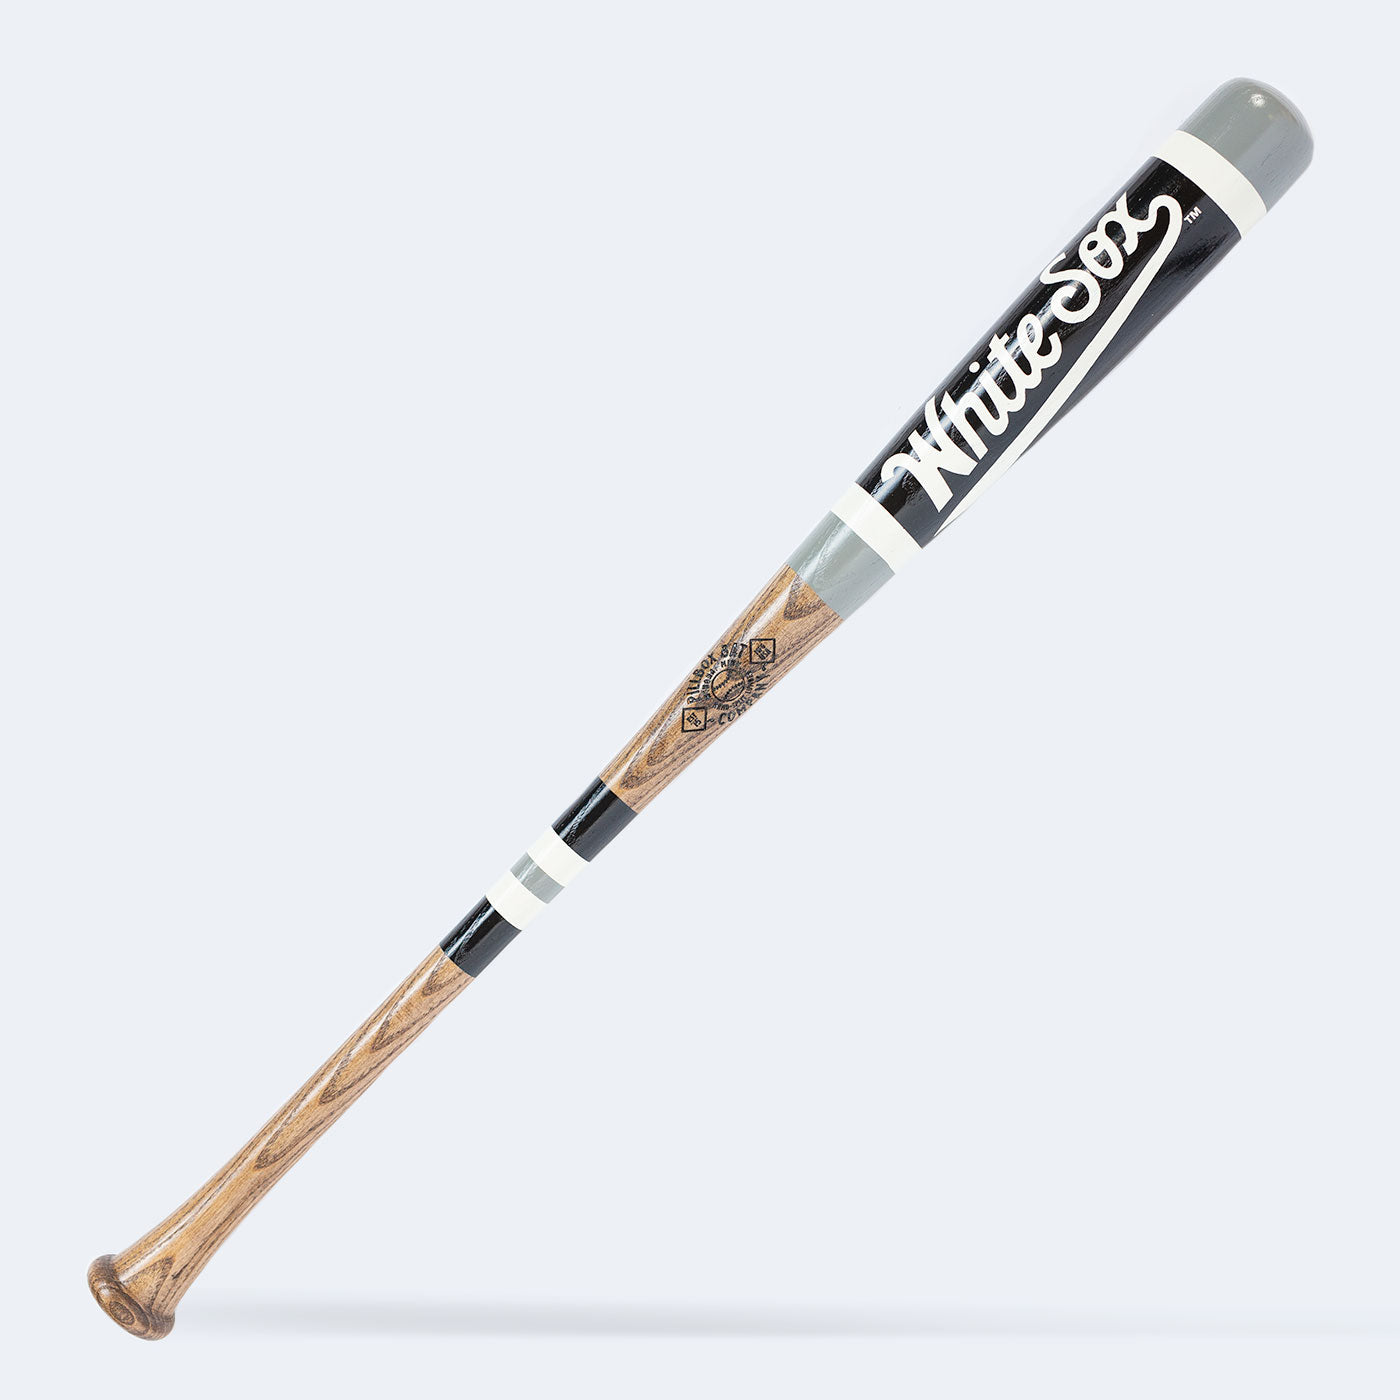 Chicago White Sox - The Beer Bat